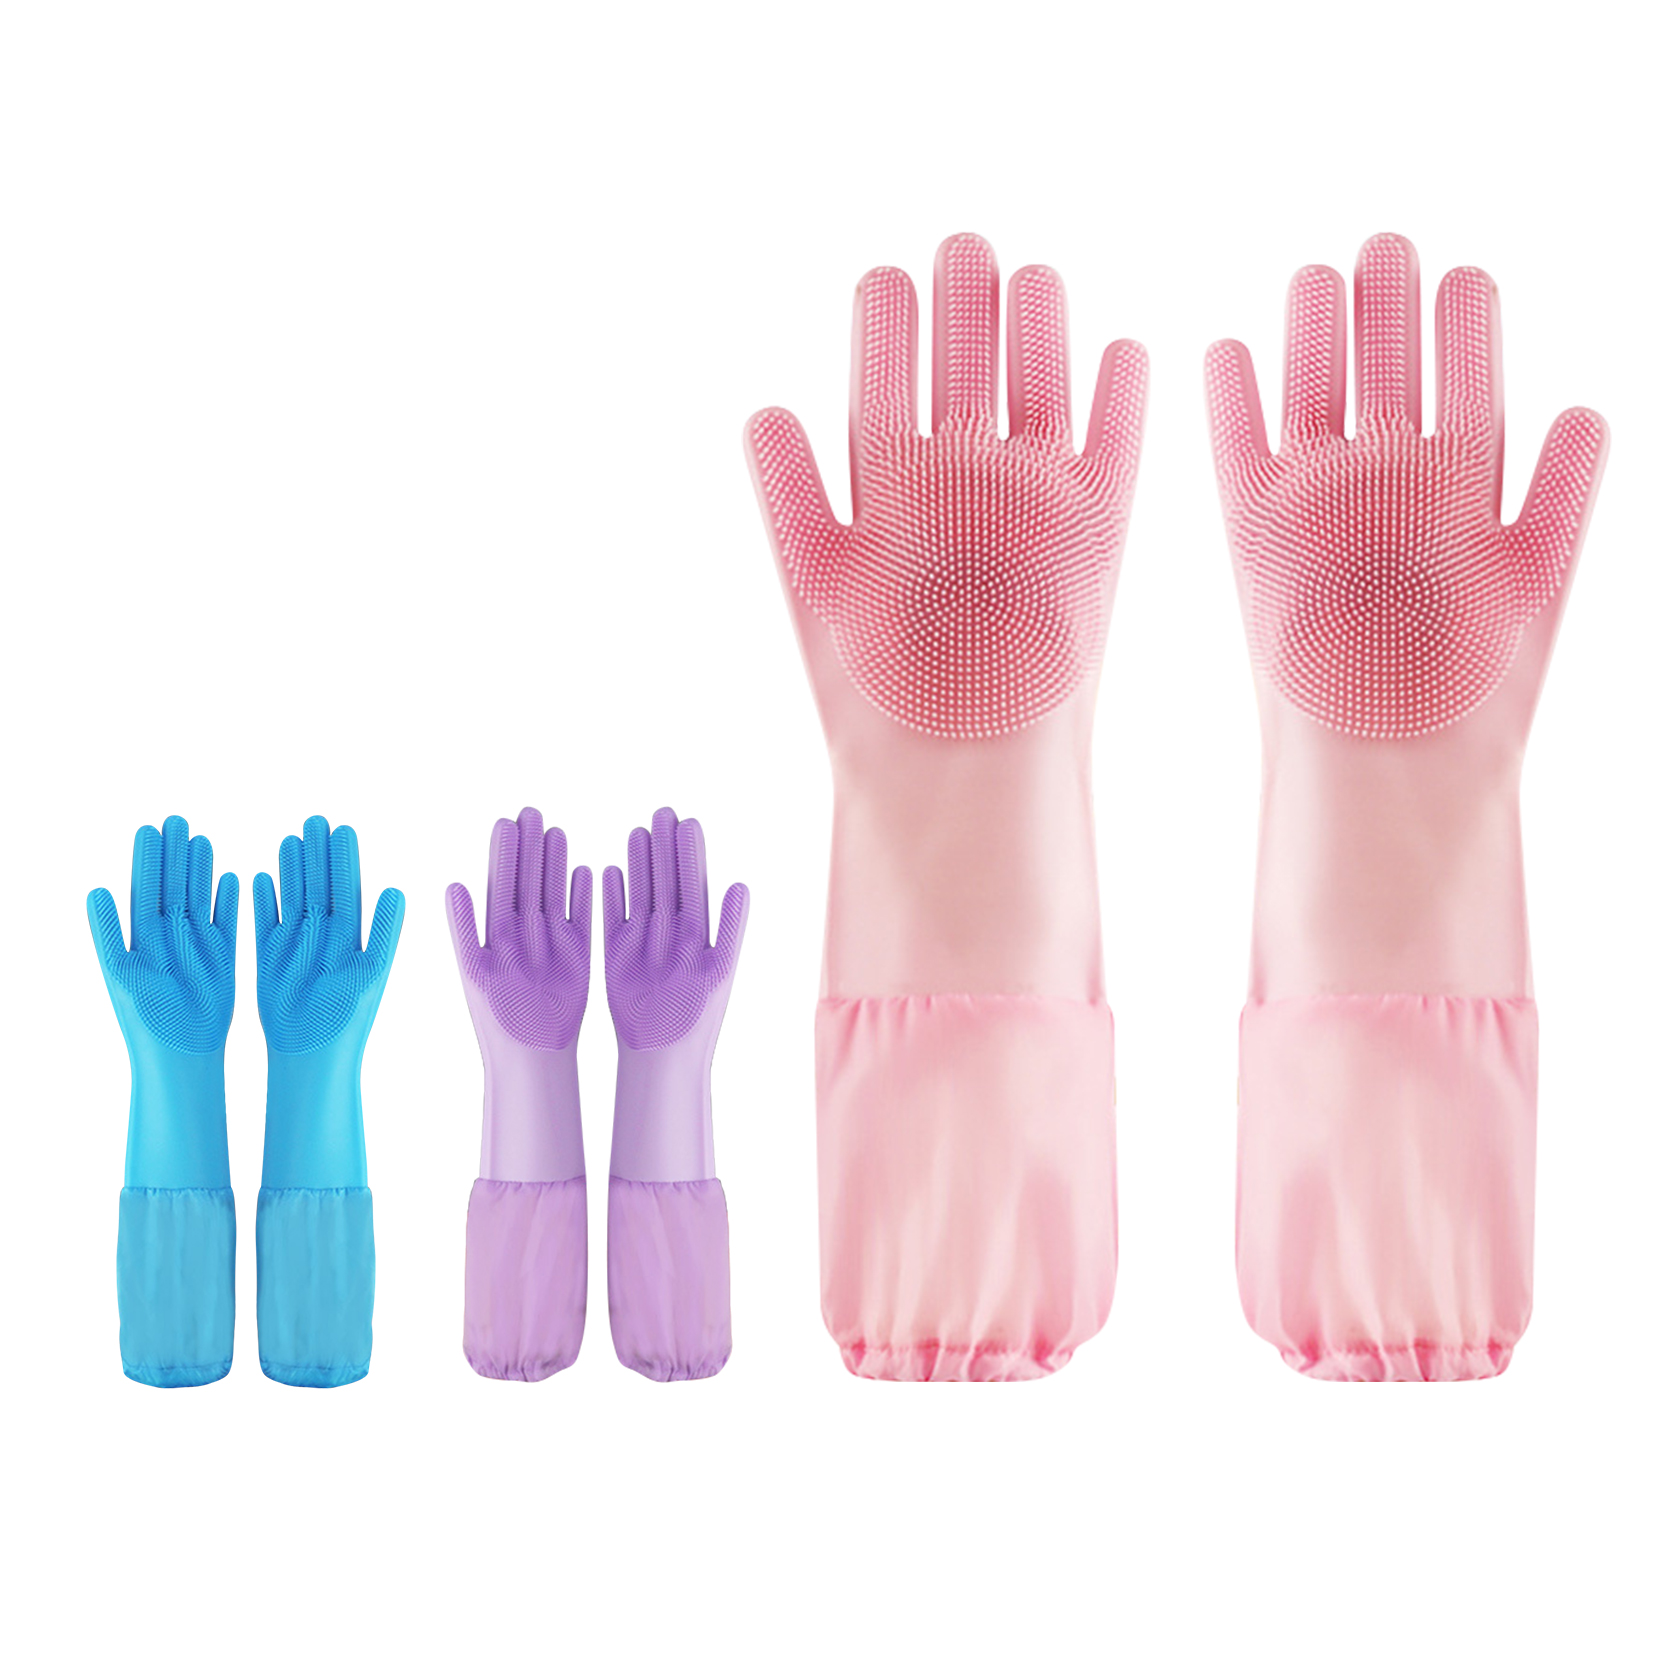 Extra Long Household Brush Cleaning Silicone Rubber Dishwashing Gloves Household Kitchen Cleaning Multifunctional Magic Brush Gloves Wholesale Featured Image